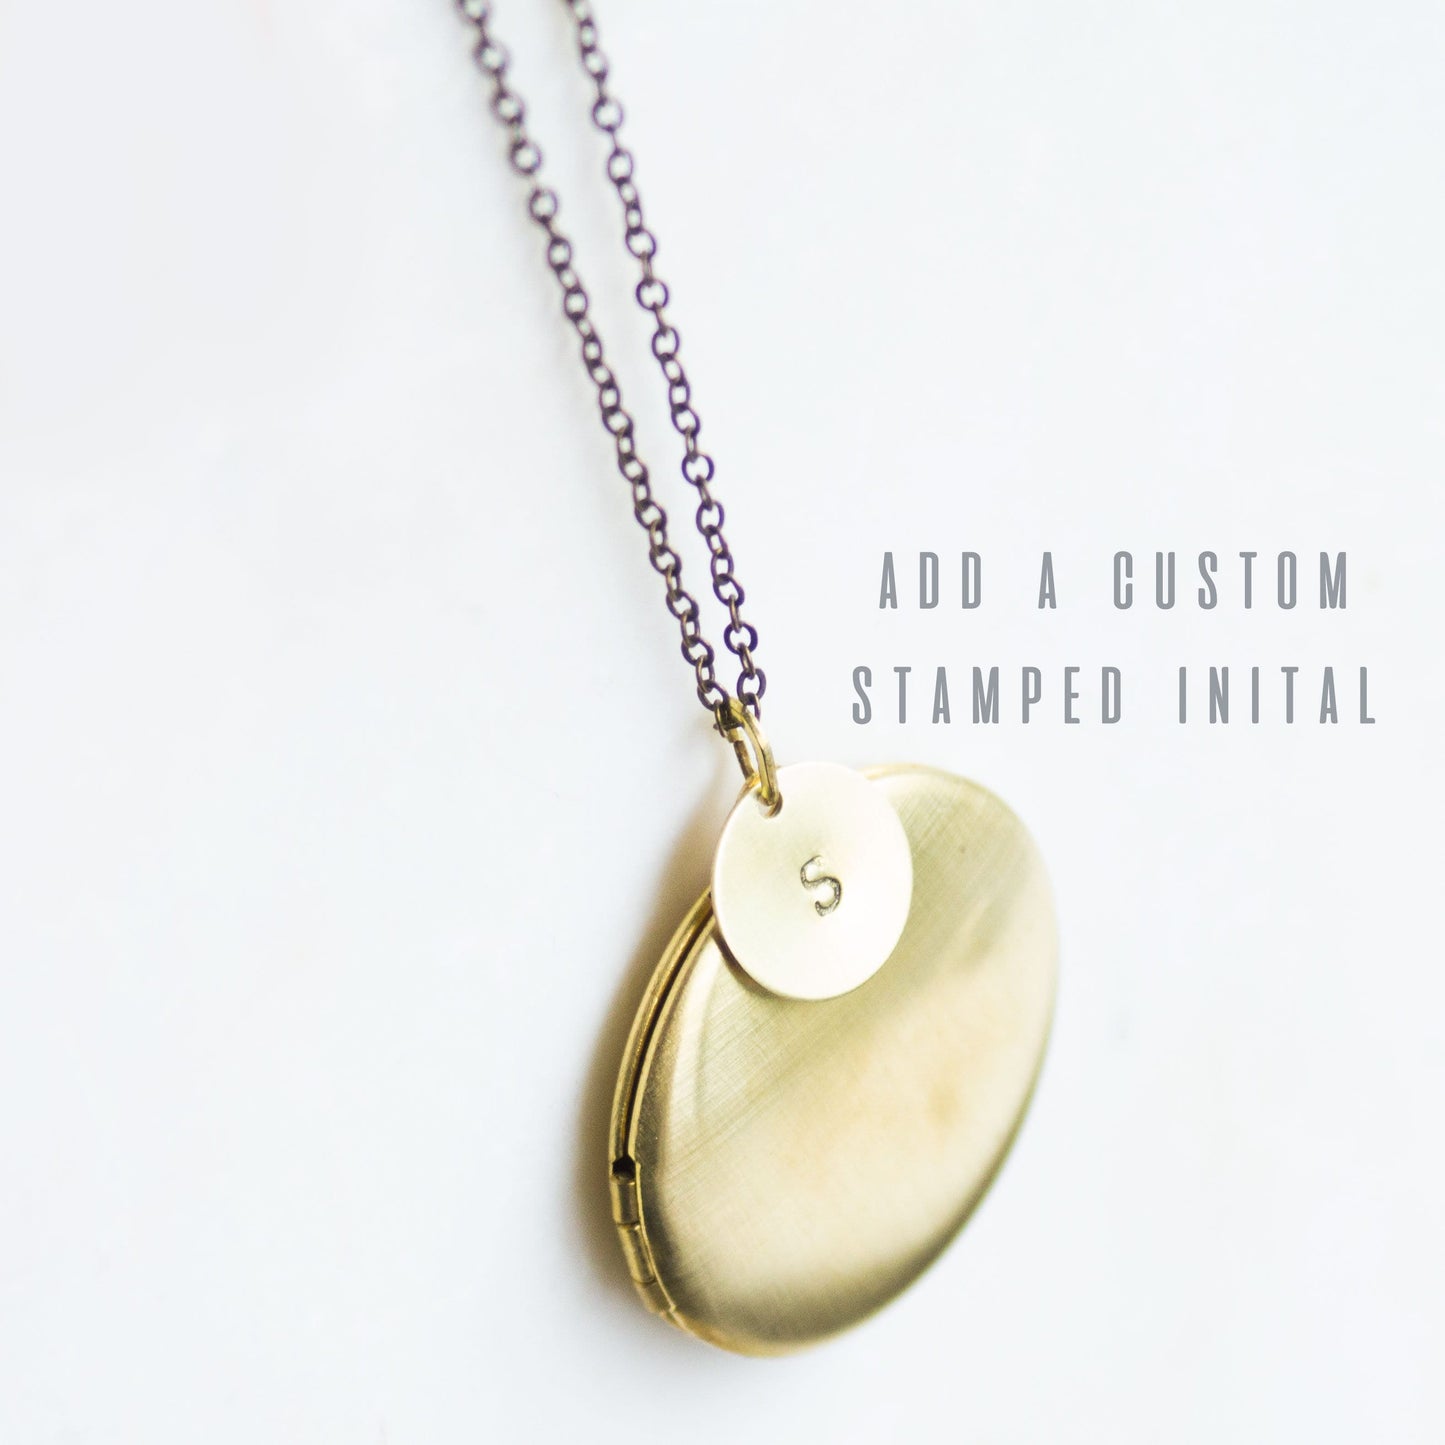 The large modern brass locket with an initial charm added to it.